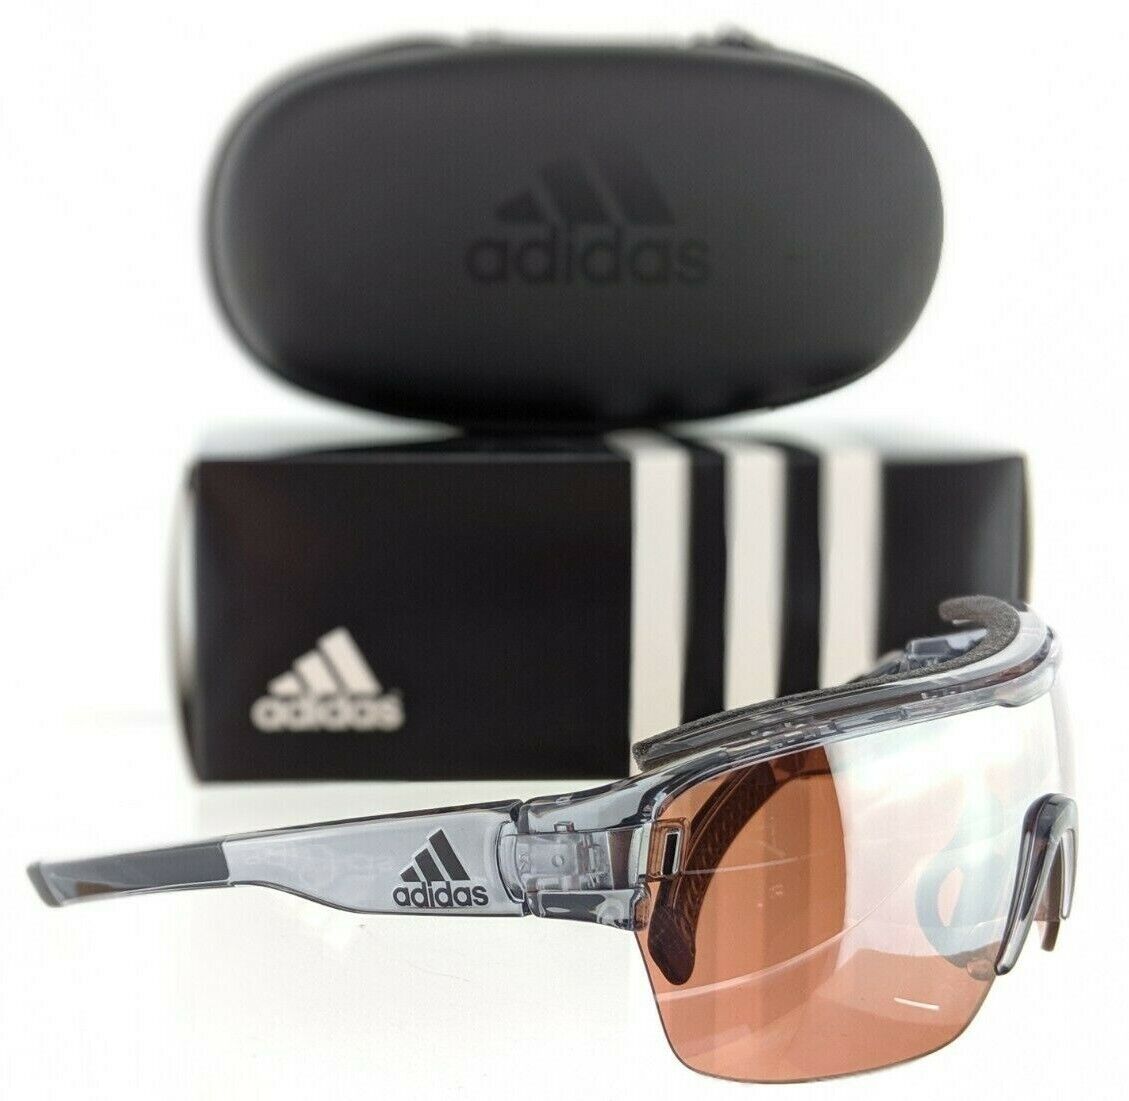 Brand New Authentic Adidas Sunglasses AD 05 75 6600 Zonyk Pro ad05 Sports Frame